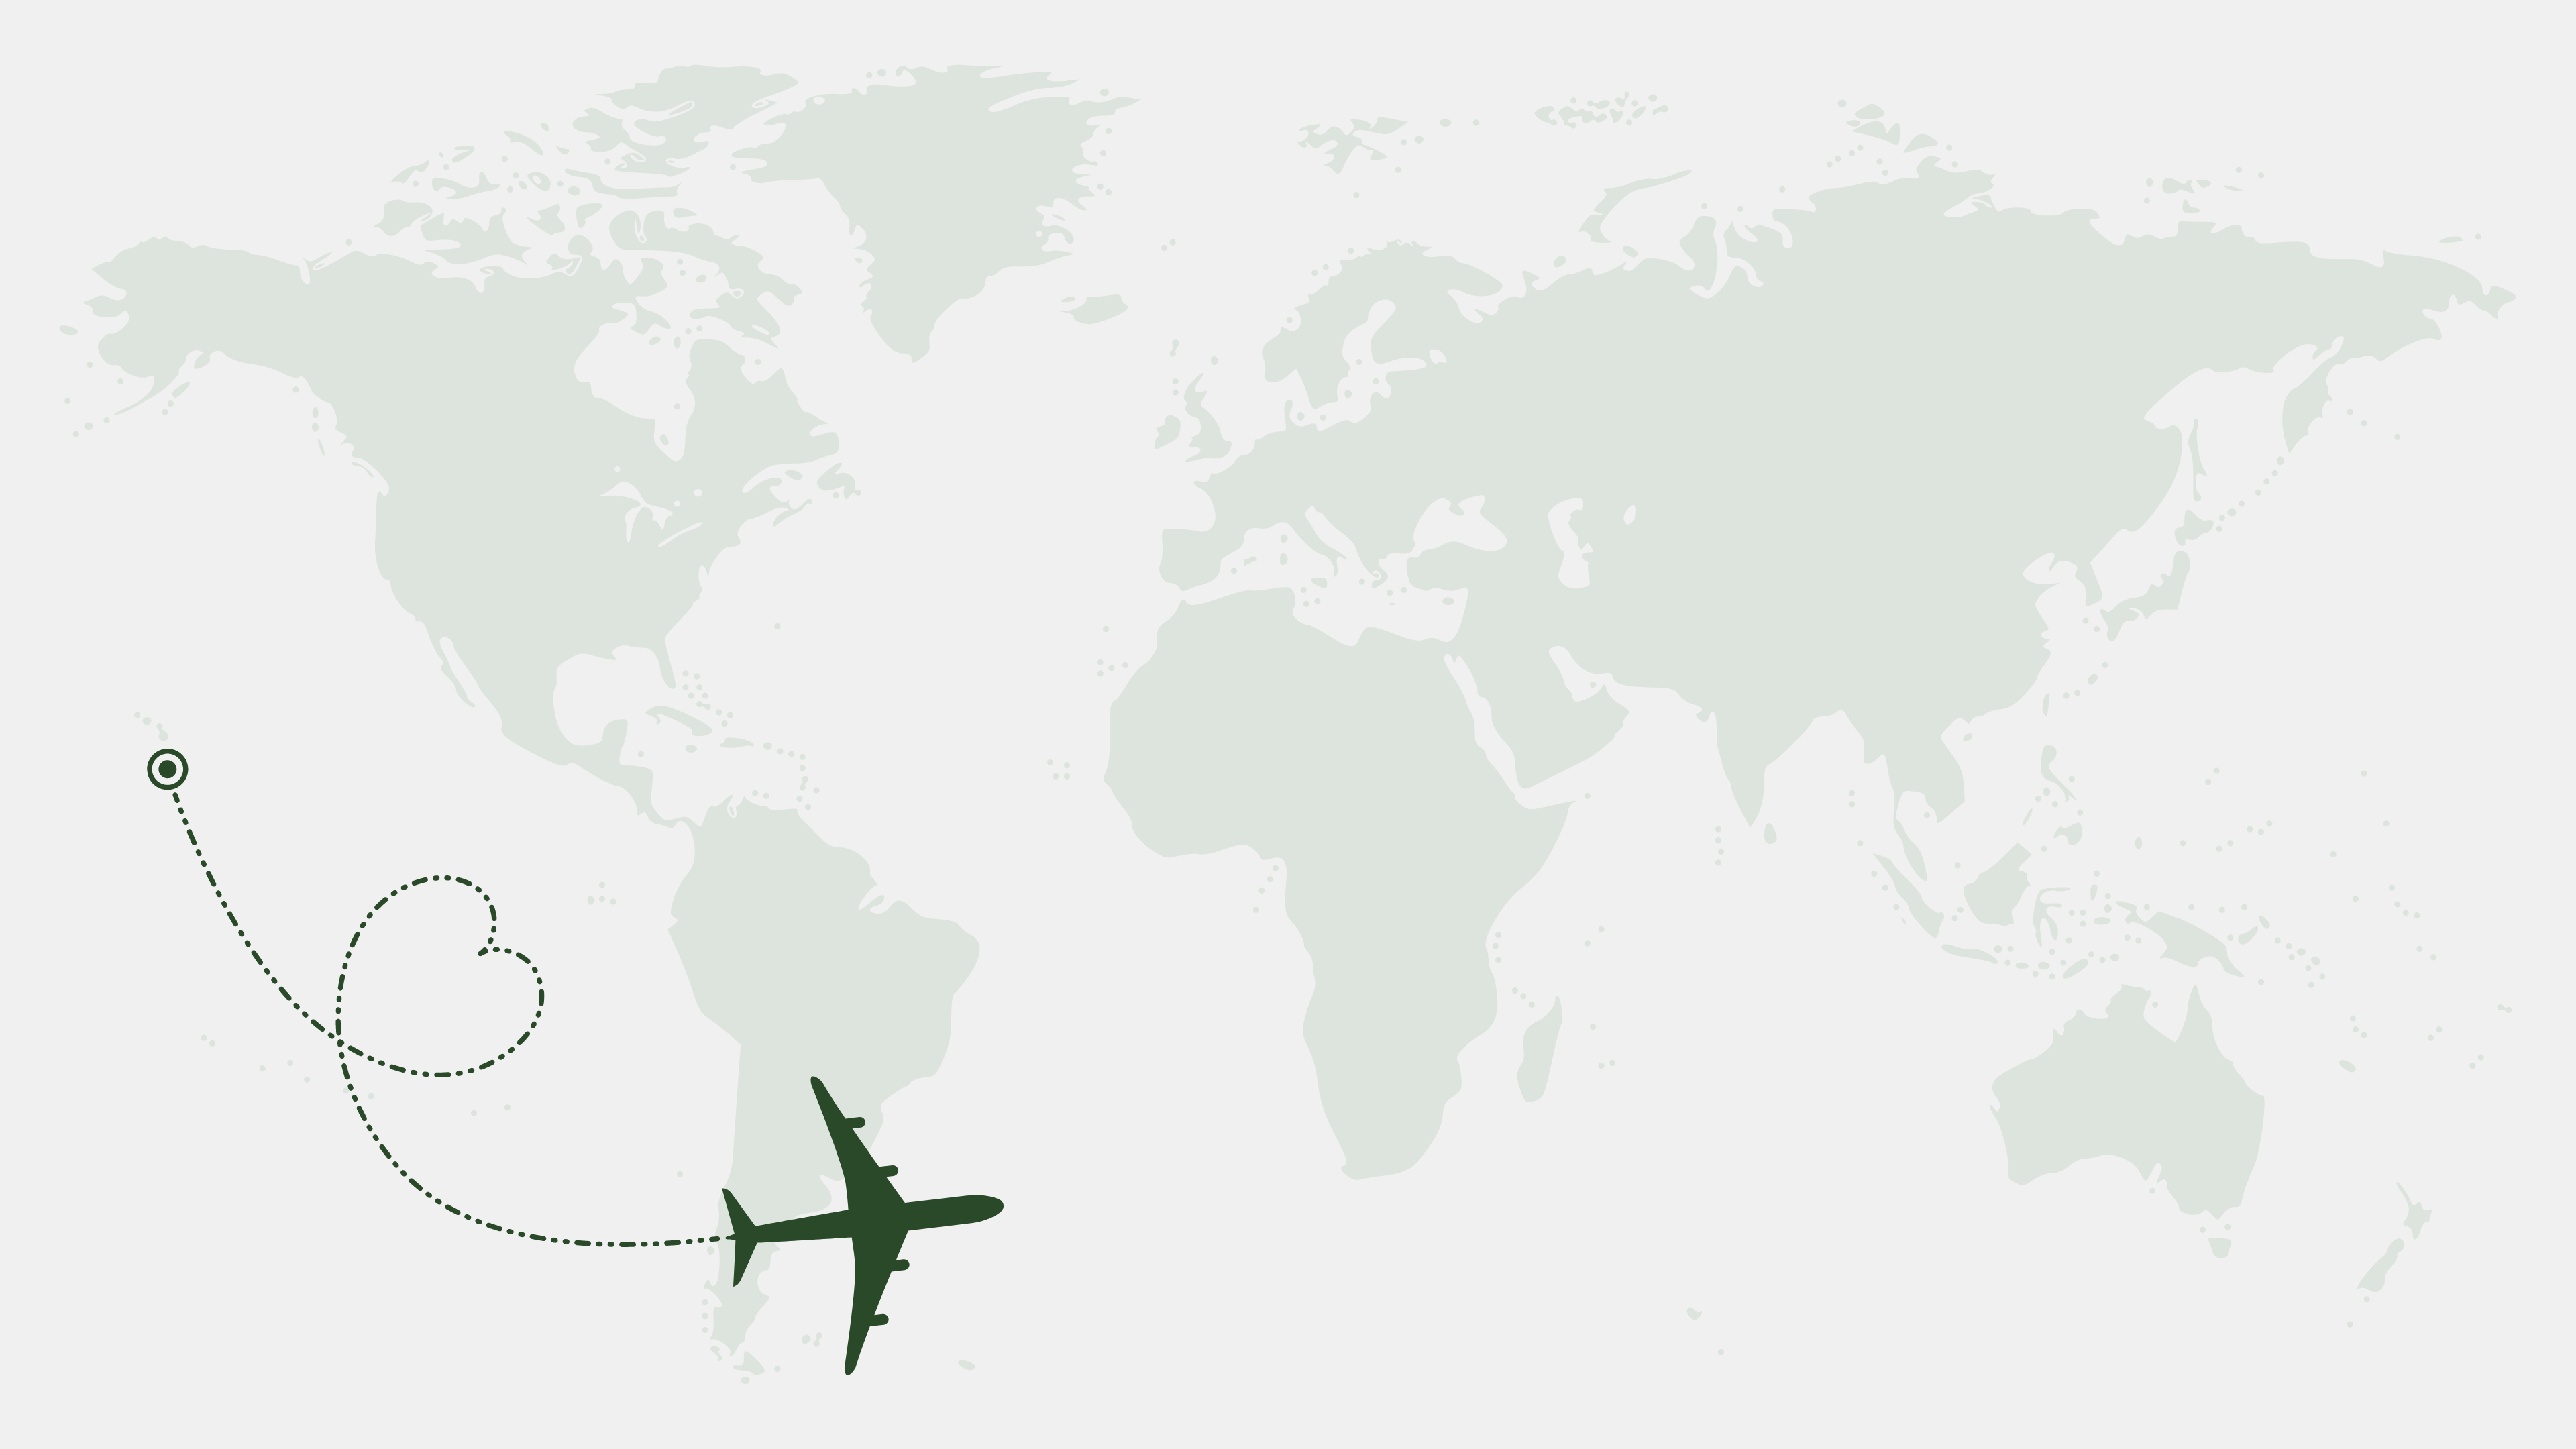 World Map with Plane to show Parenting on Planes